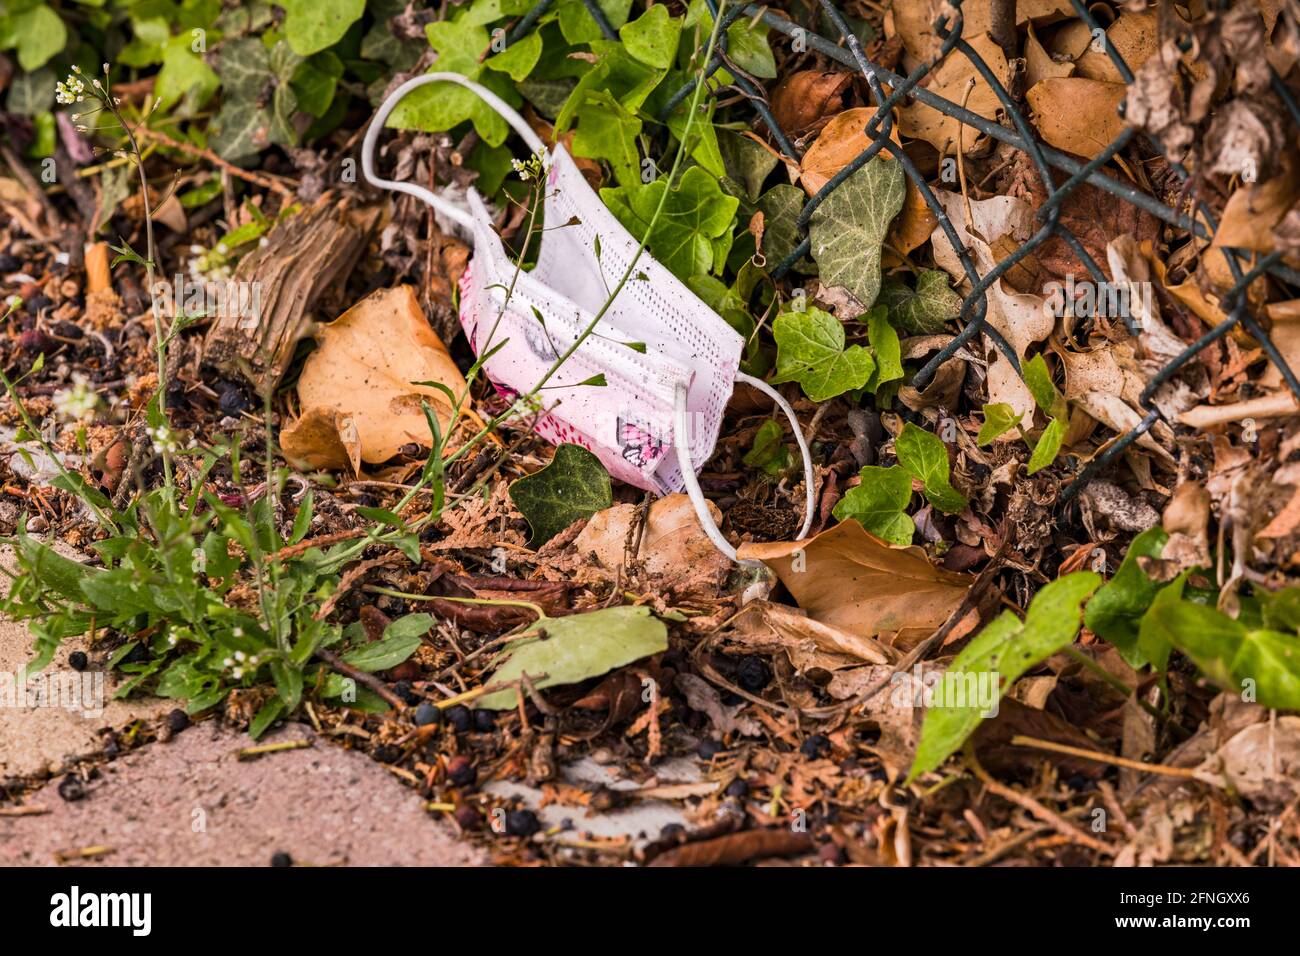 A pink surgical mask for children pollutes the natural environment around us Stock Photo